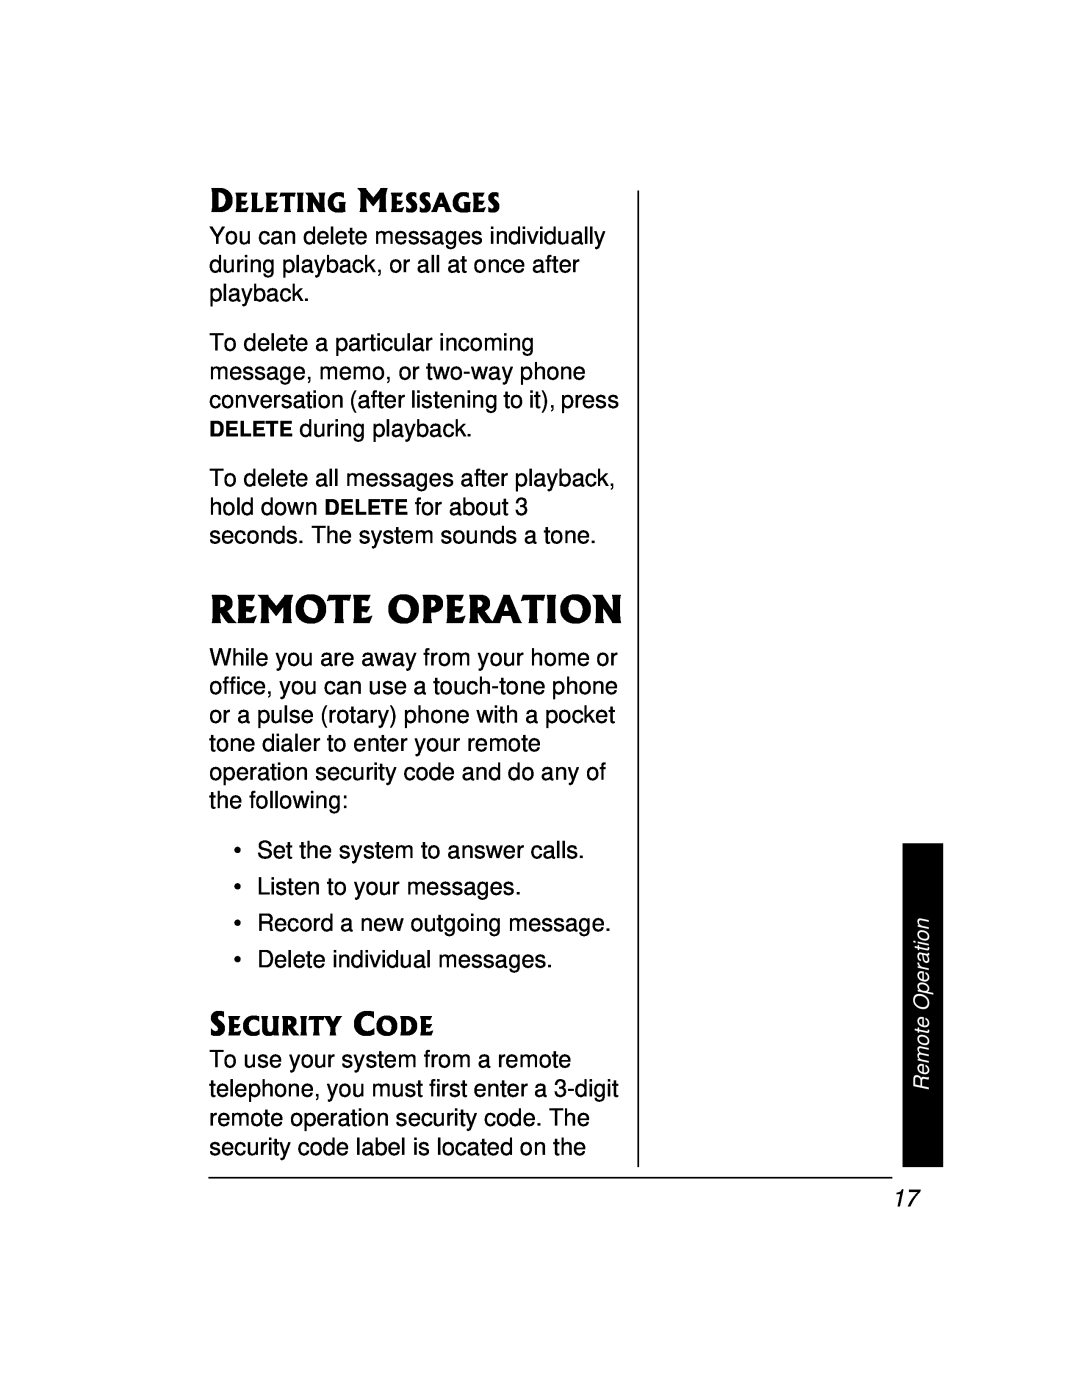 Radio Shack 43-3888 owner manual Remote Operation, Deleting Messages, Security Code 